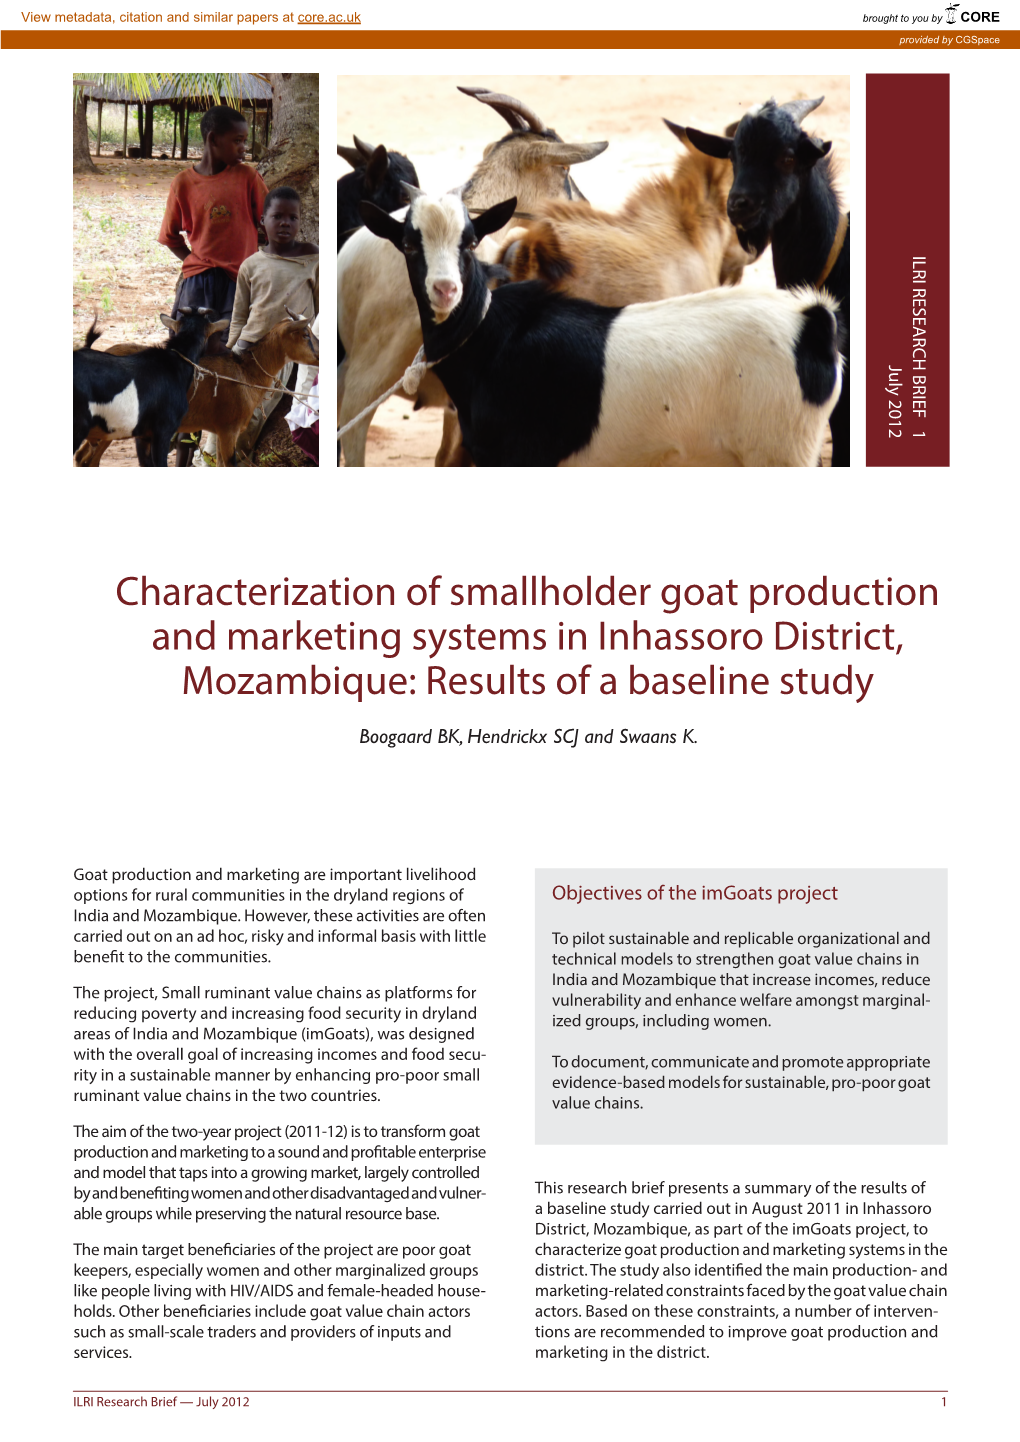 Characterization of Smallholder Goat Production and Marketing Systems in Inhassoro District, Mozambique: Results of a Baseline Study